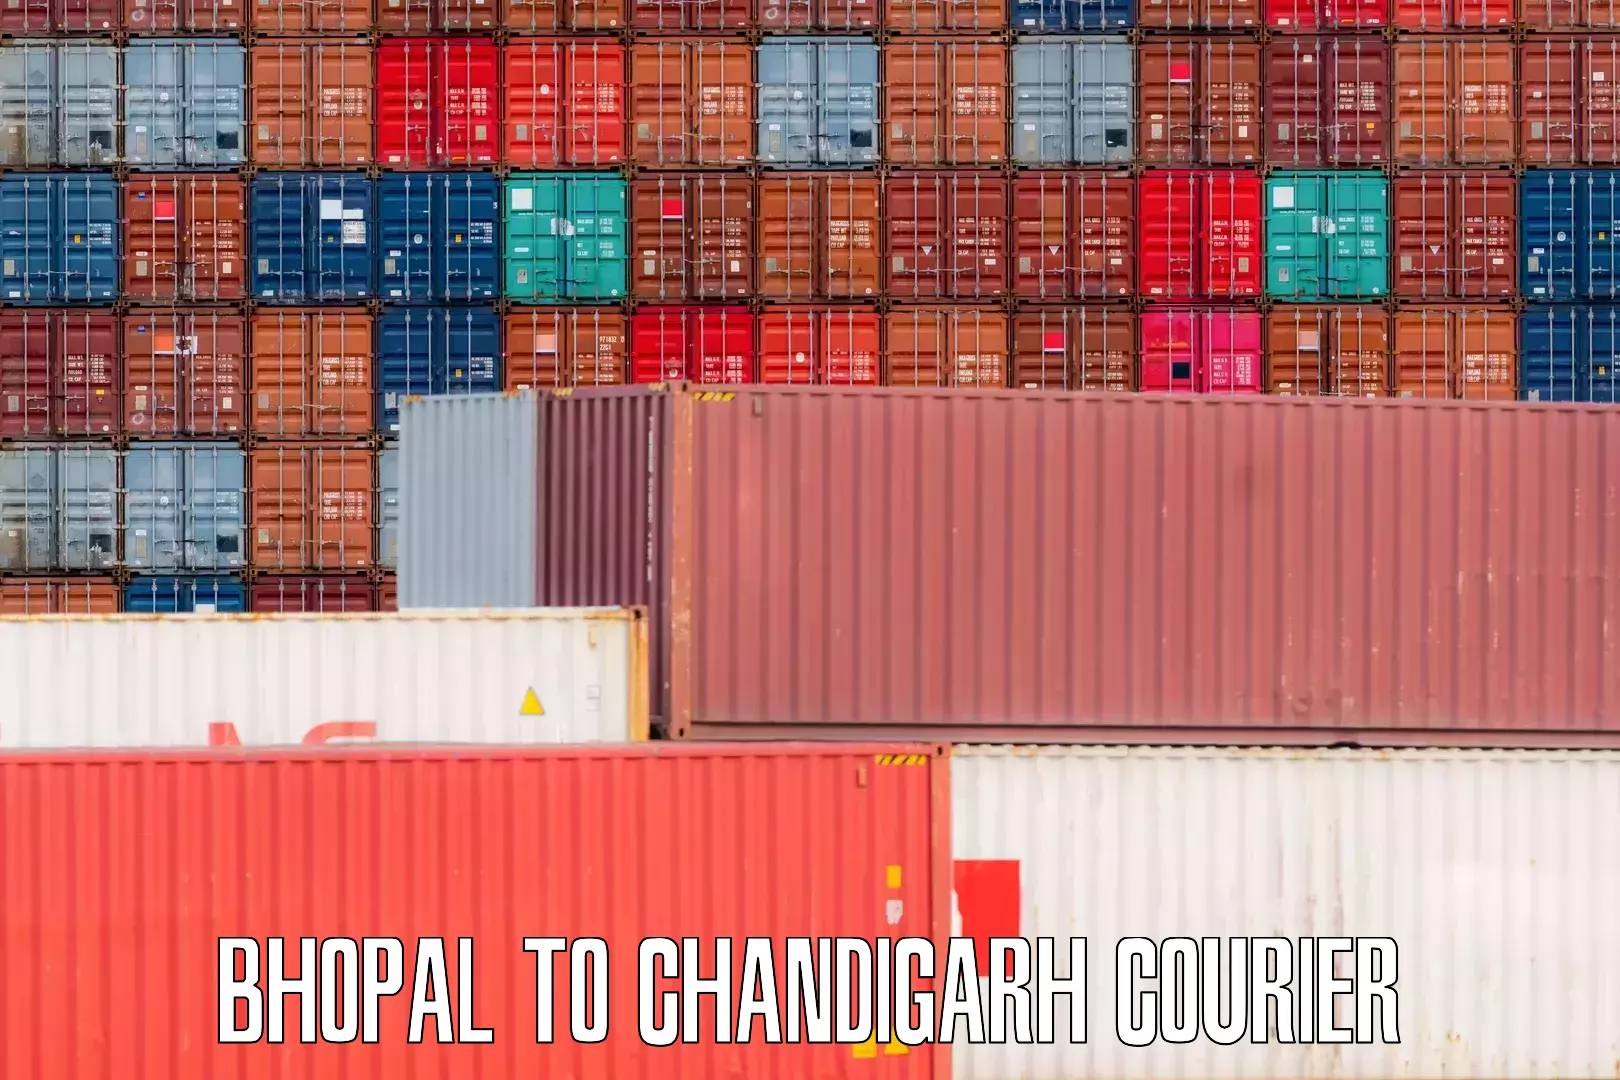 Luggage shipment specialists Bhopal to Chandigarh